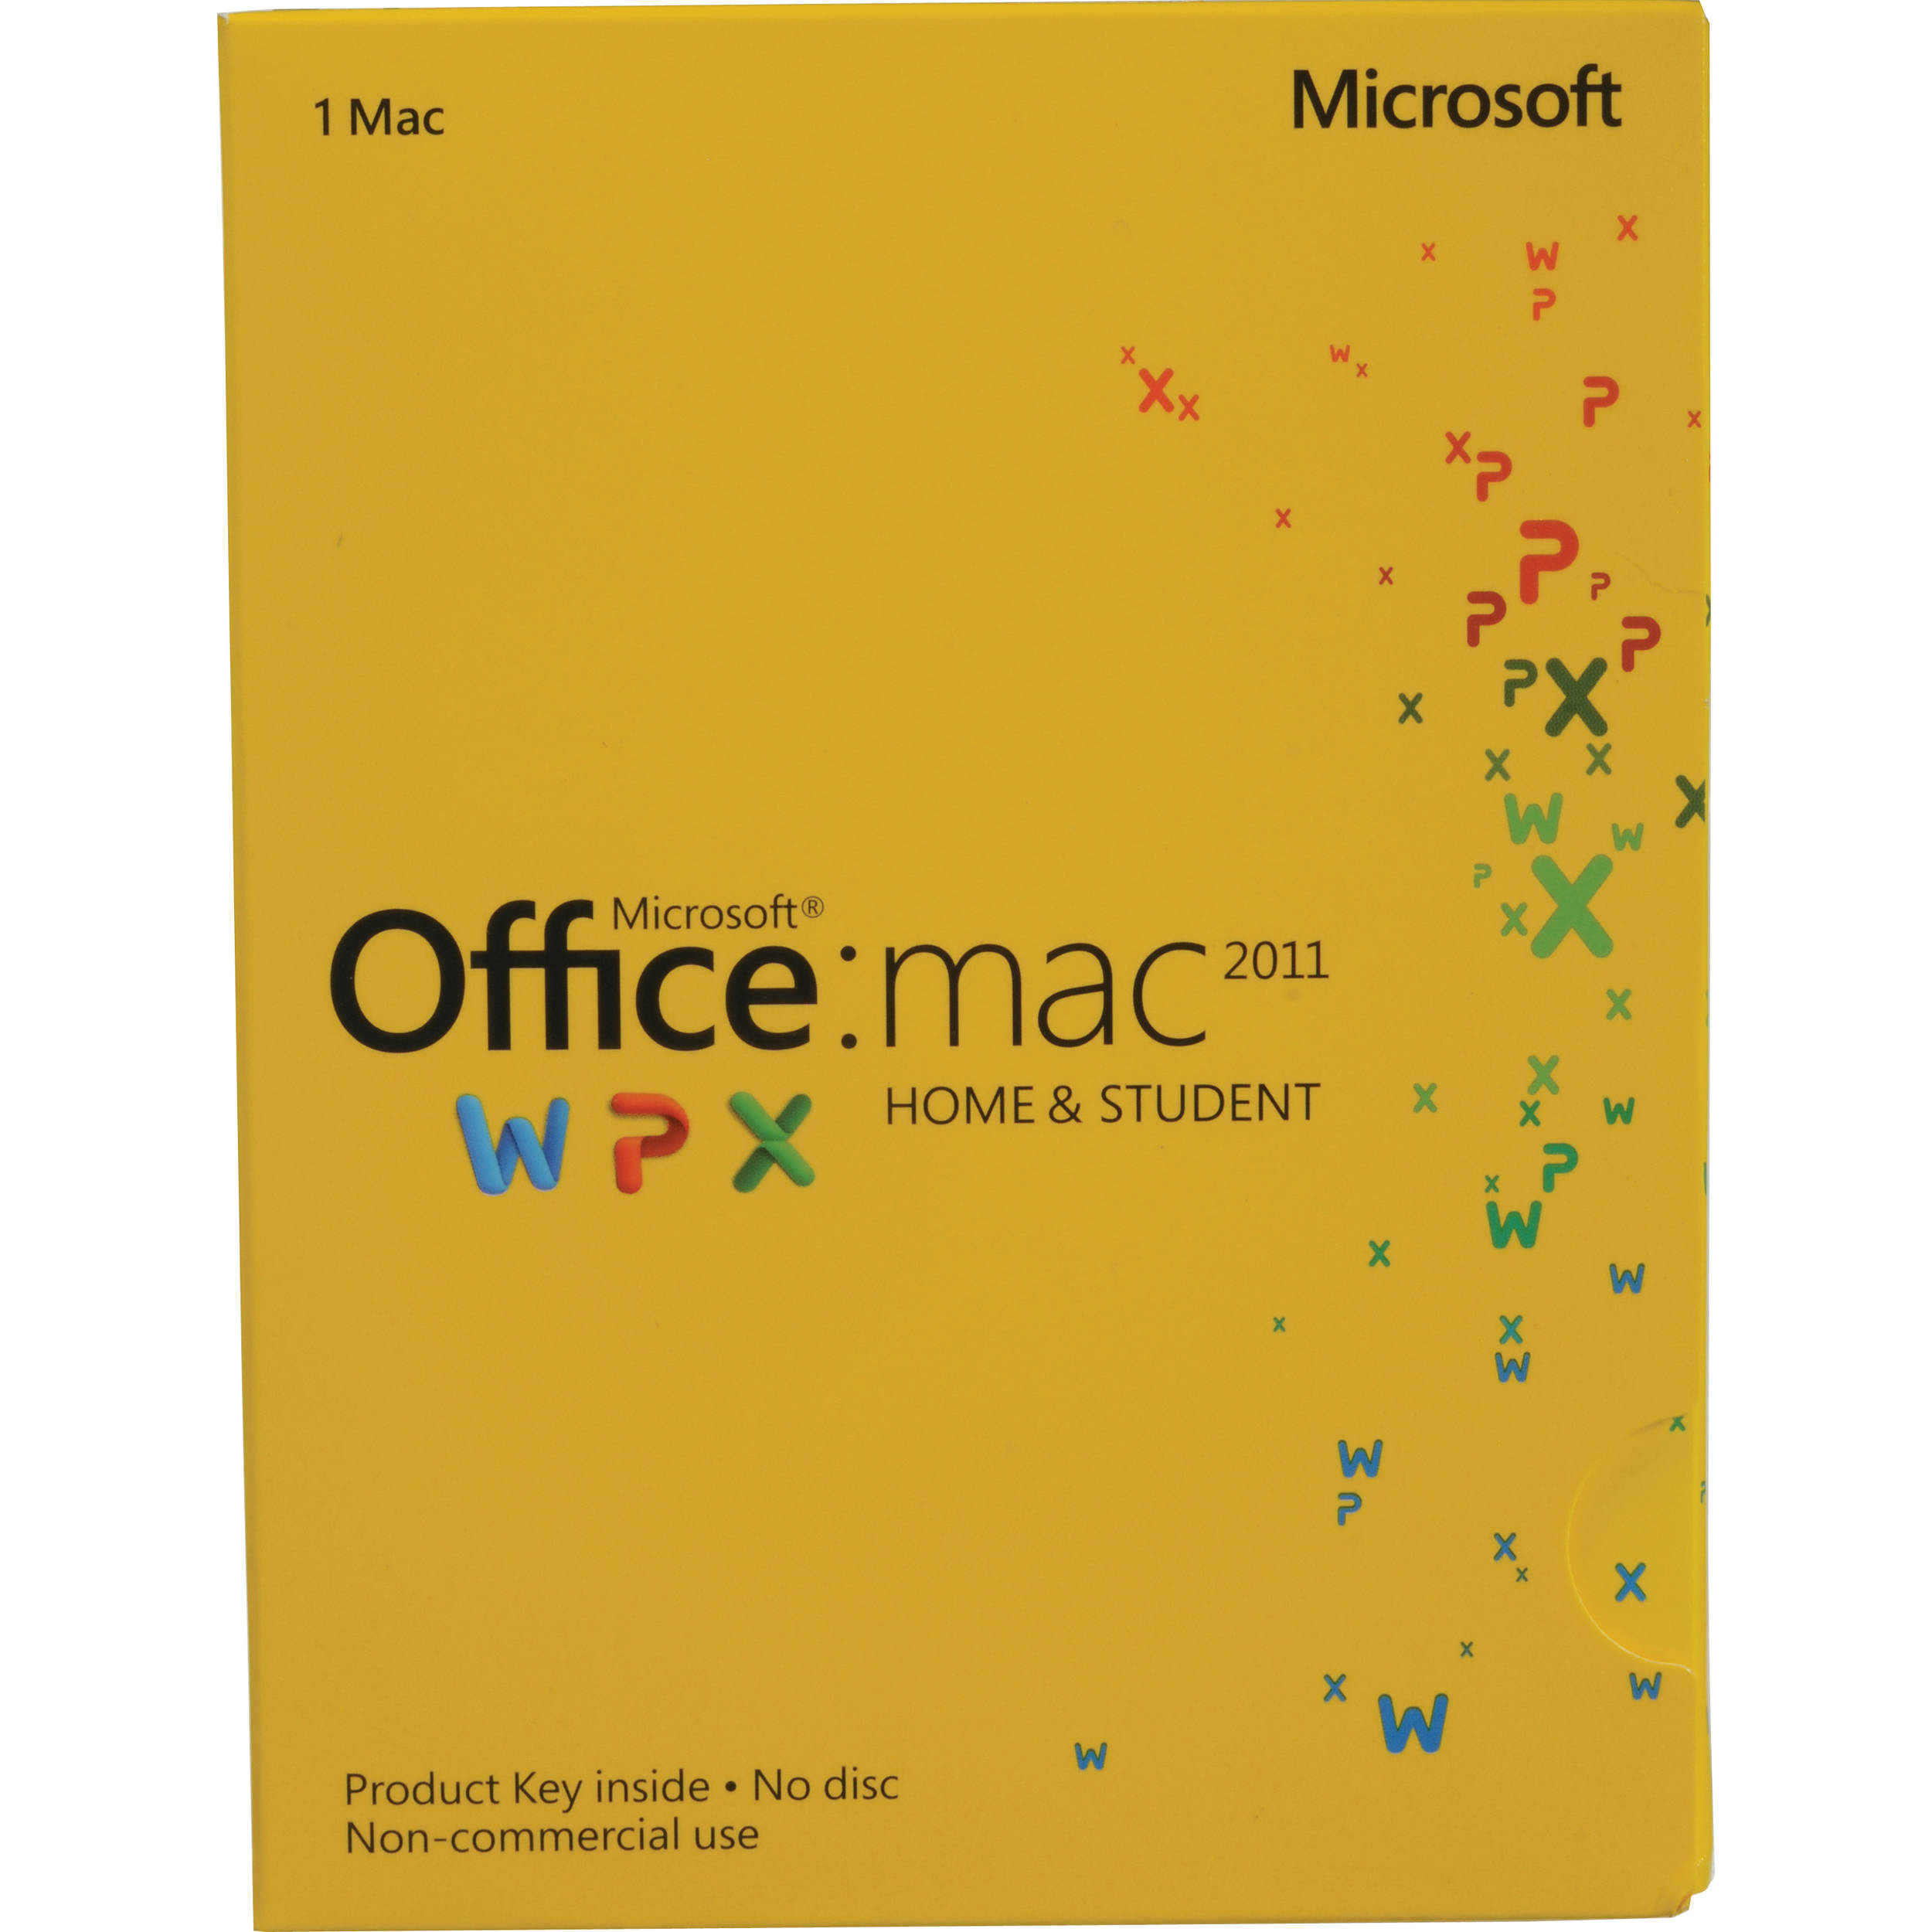 office home & student 2016 for mac for multiple computers